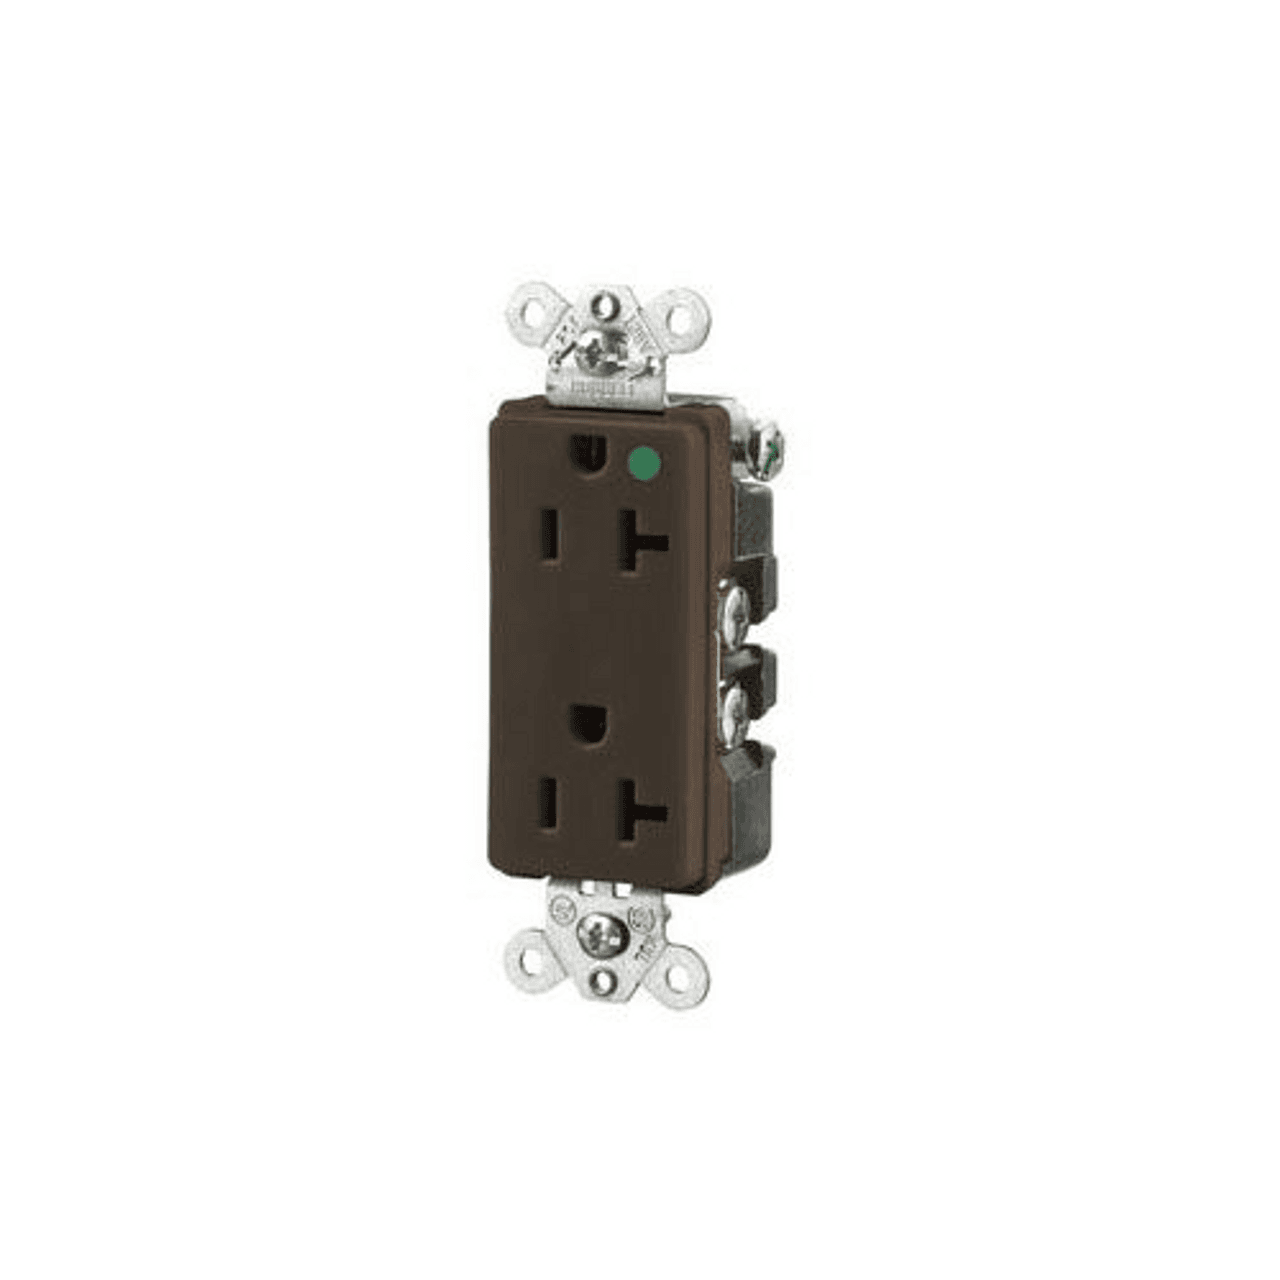 Hubbell HBL2182 Straight Blade Devices, Receptacles, Duplex, Hospital Grade, 2-Pole 3-Wire Grounding, 20A 125V, 5-20R, Brown, Single Pack.  ; Aesthetic Style Line� decorator design ; High impact resistant face ; Triple wipe contacts ; Standard, Self Grounding